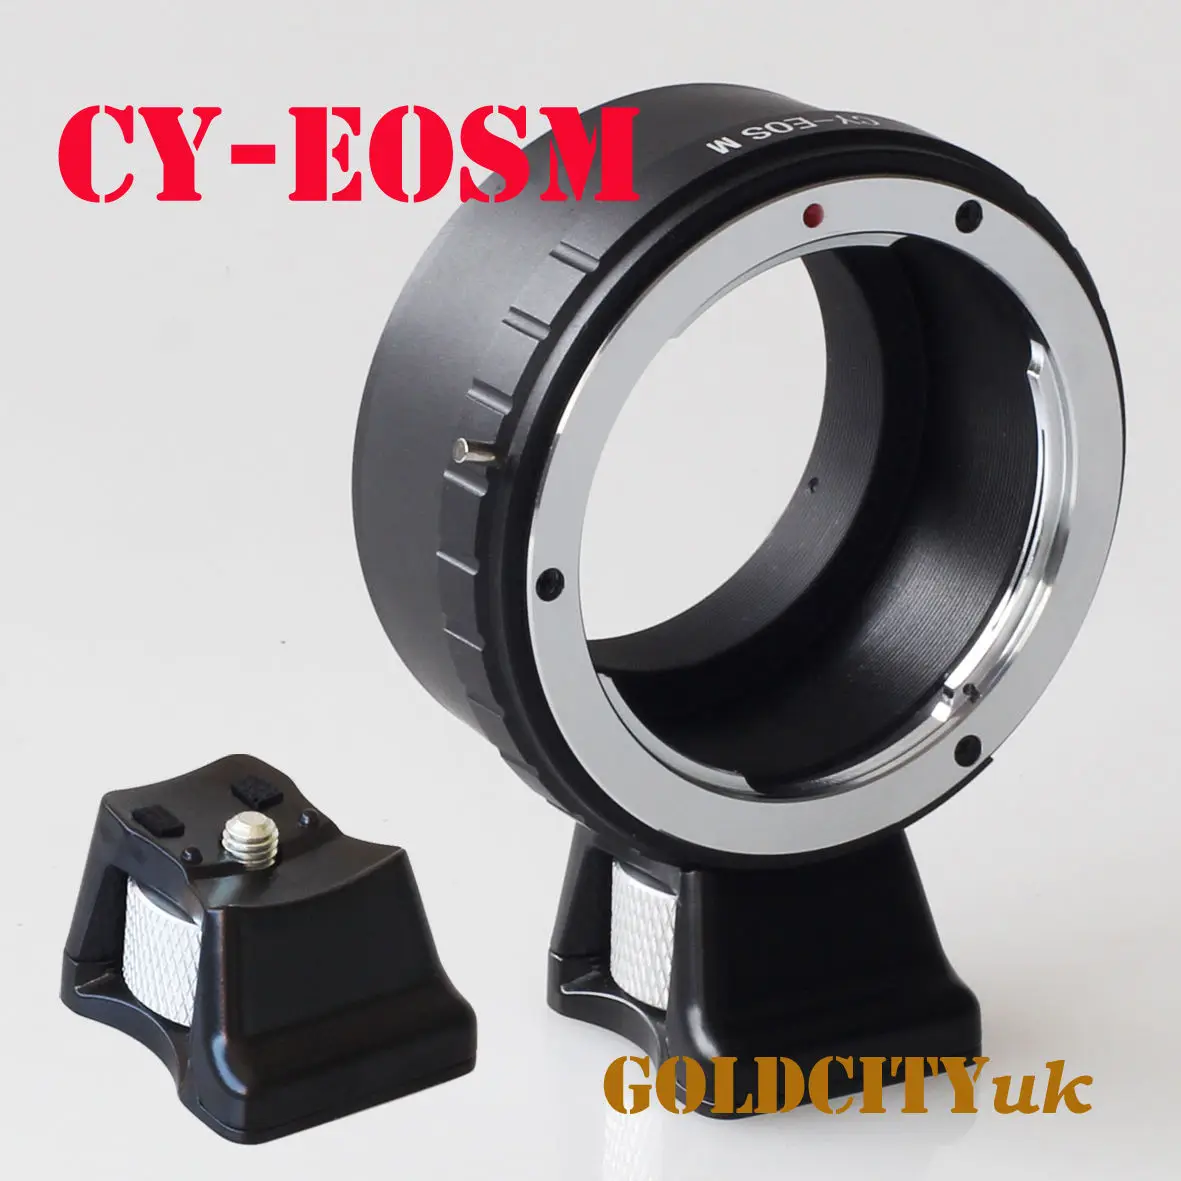 

Adapter Ring with Tripod Stand for Contax/Yashics CY Lens to canon EOSM EF-M Mirrorless Camera eosm/m1/m2/m3/m5/m6/m10/m50/m100